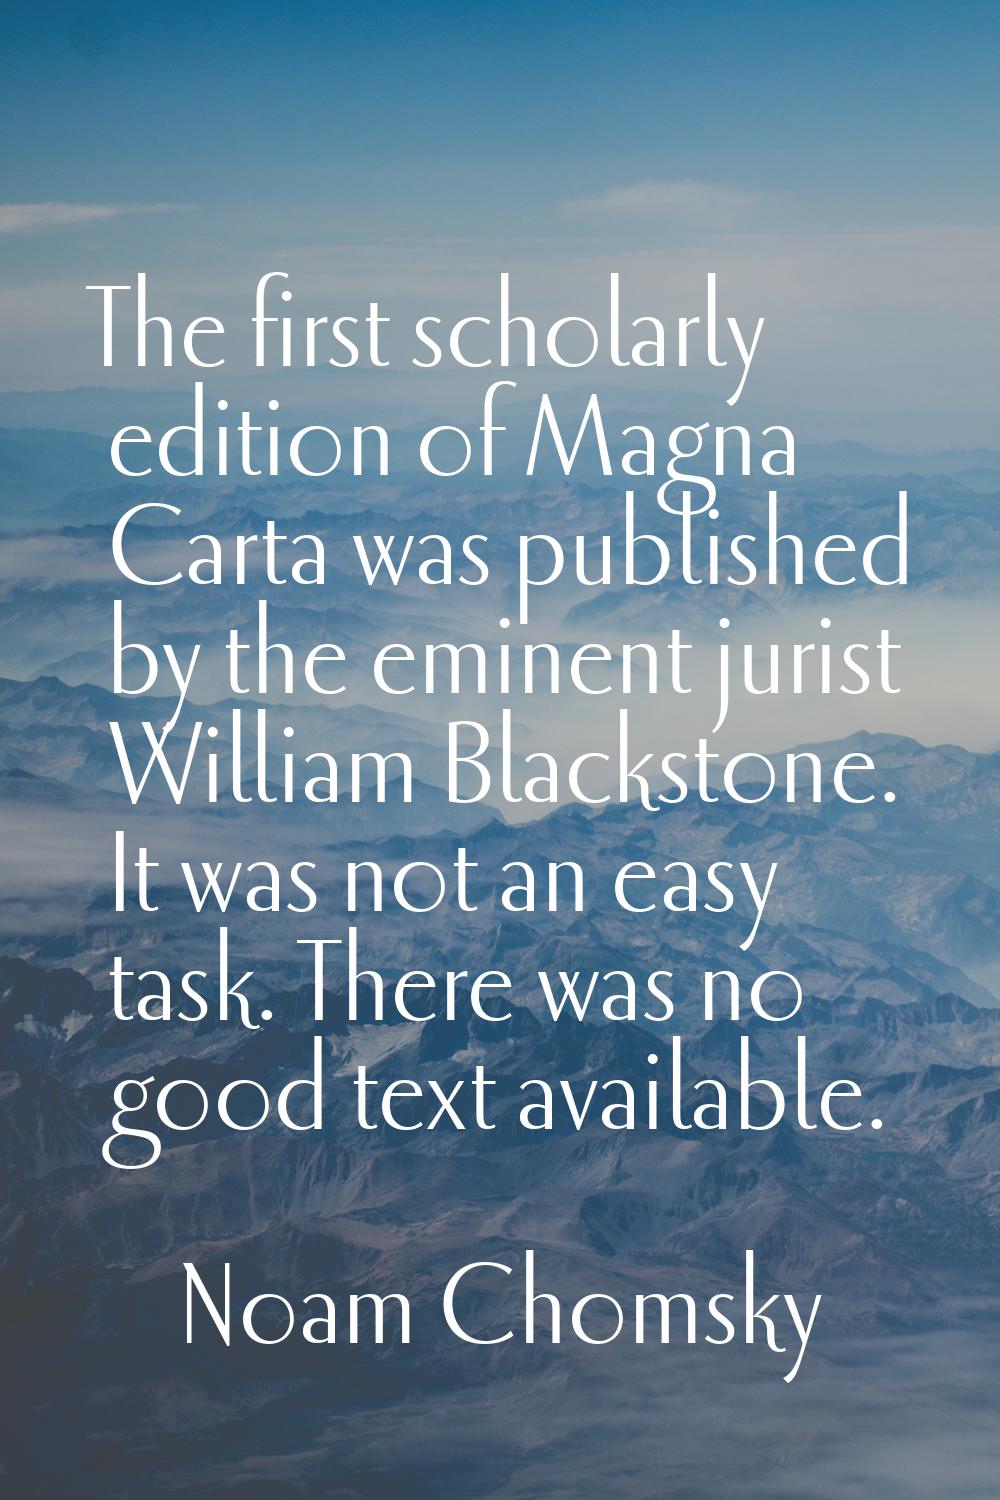 The first scholarly edition of Magna Carta was published by the eminent jurist William Blackstone. 